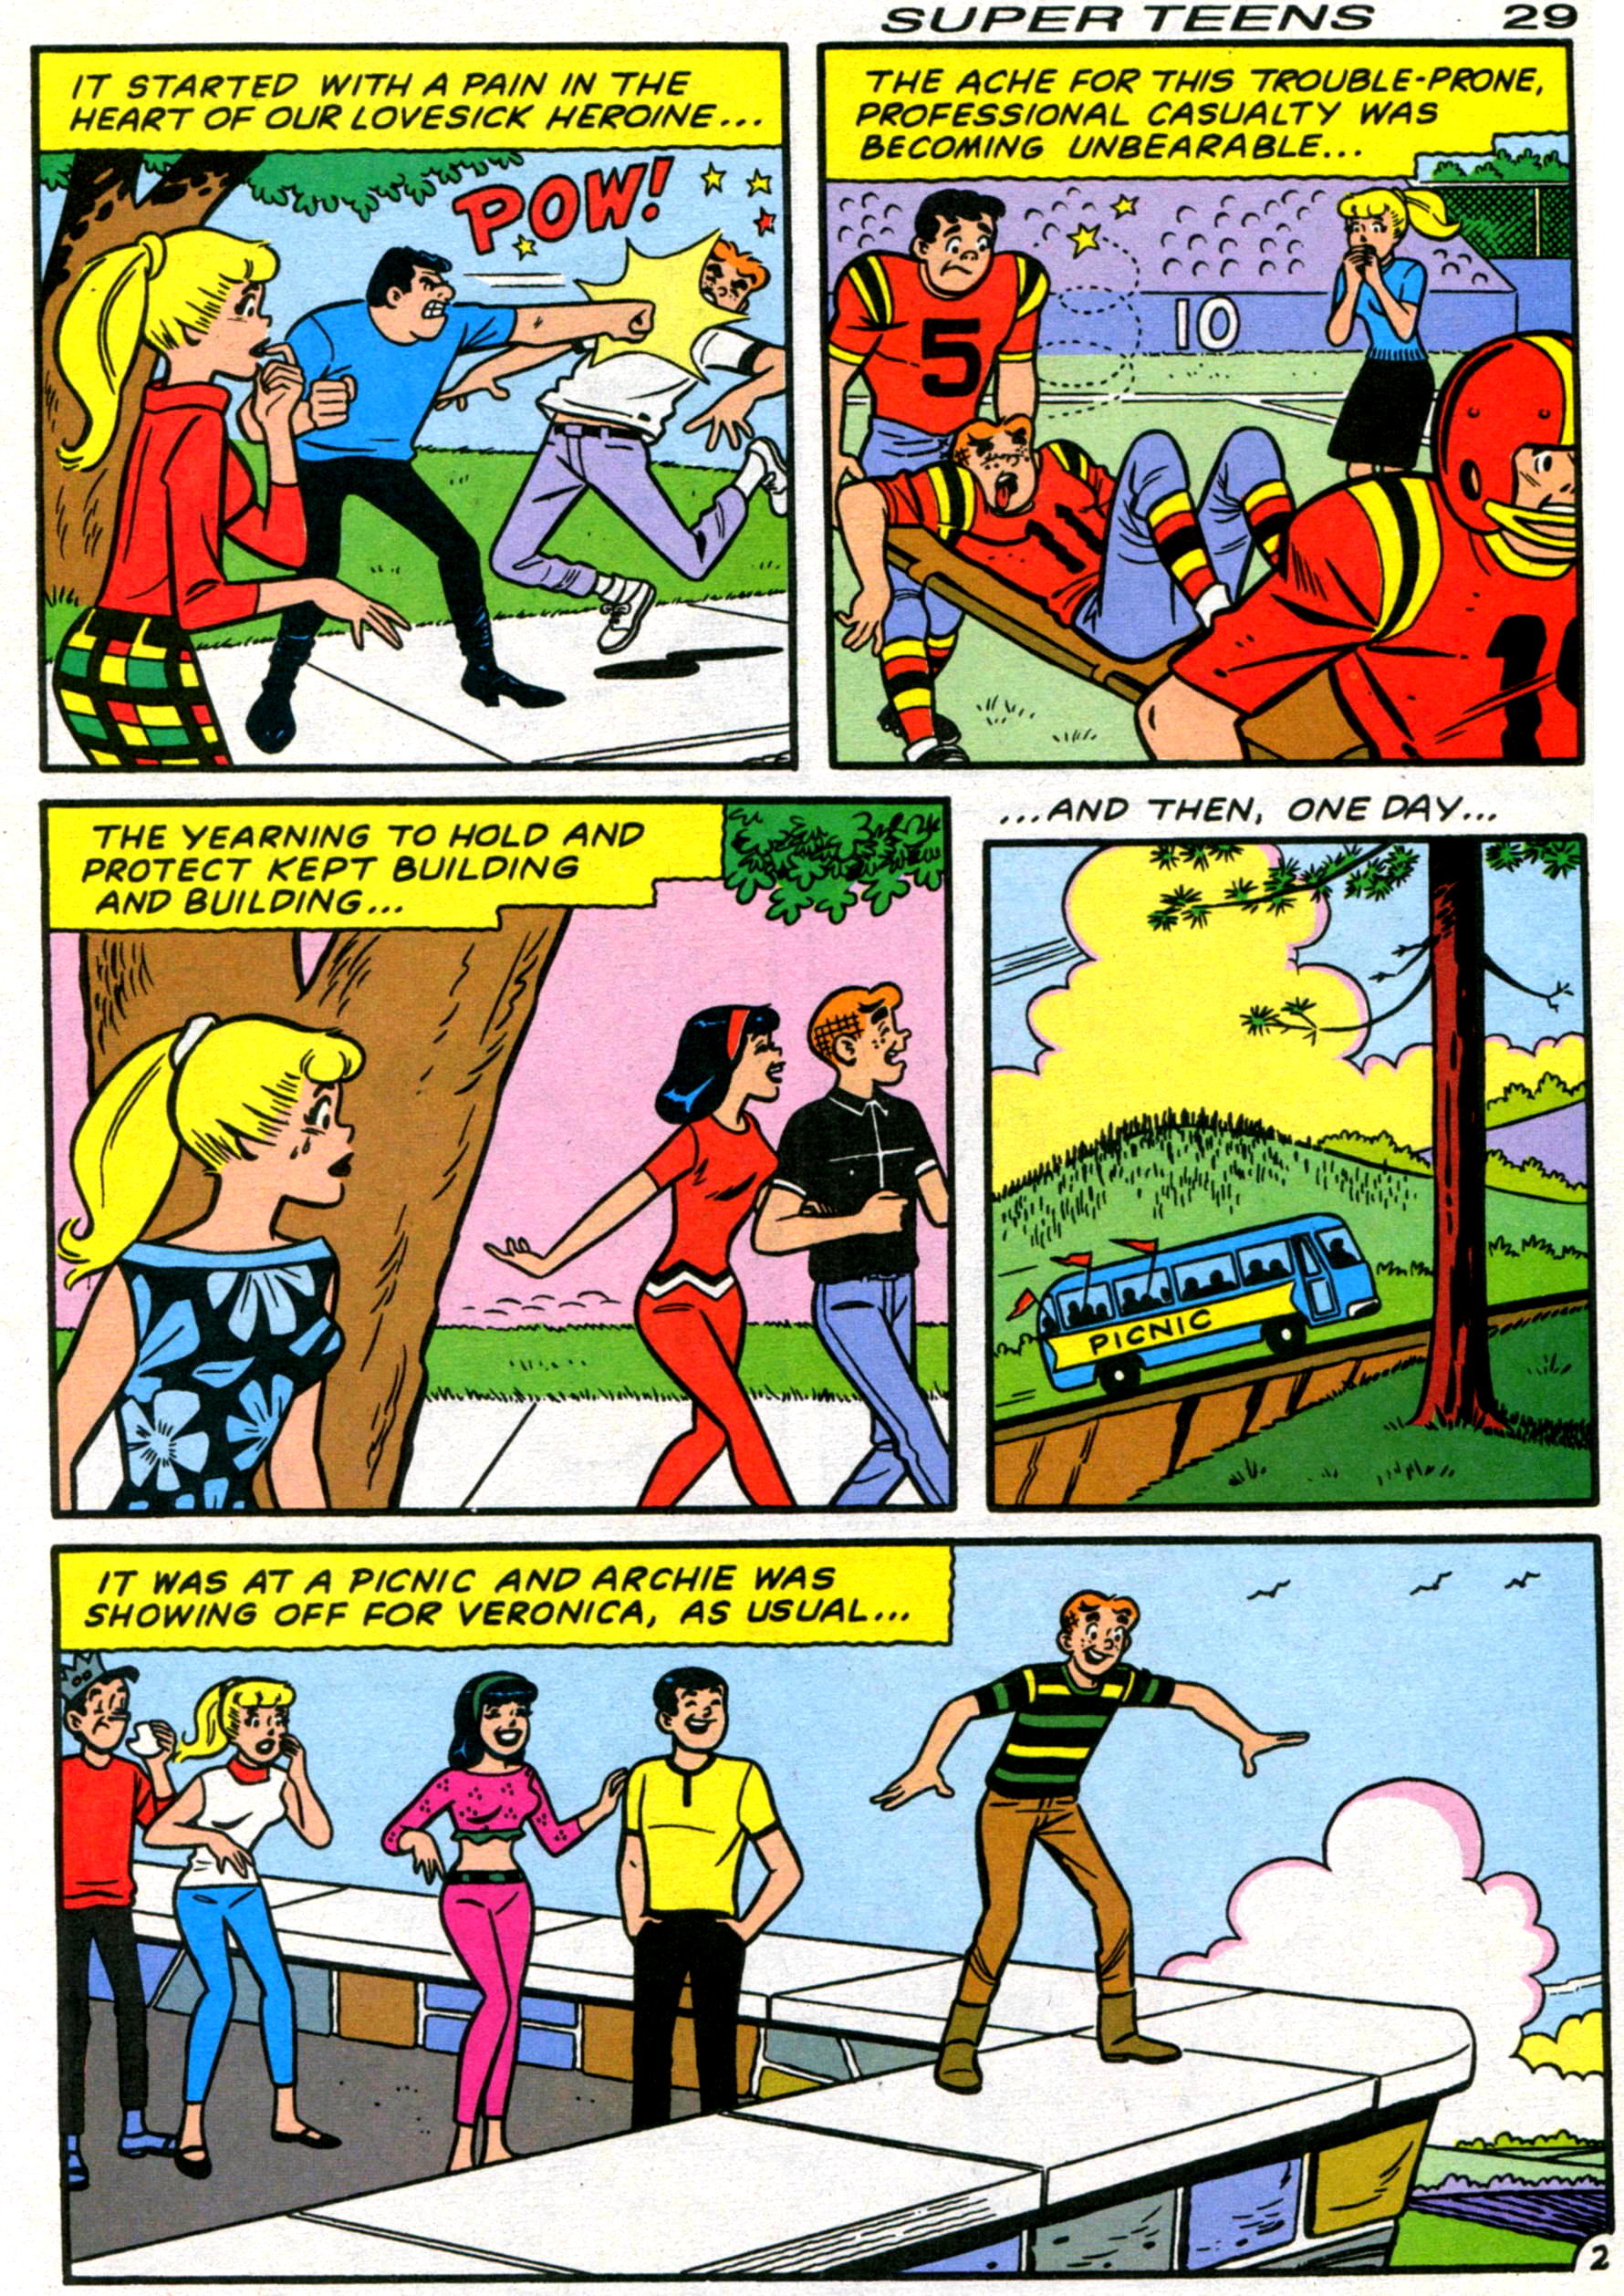 Read online Archie's Super Teens comic -  Issue #1 - 31